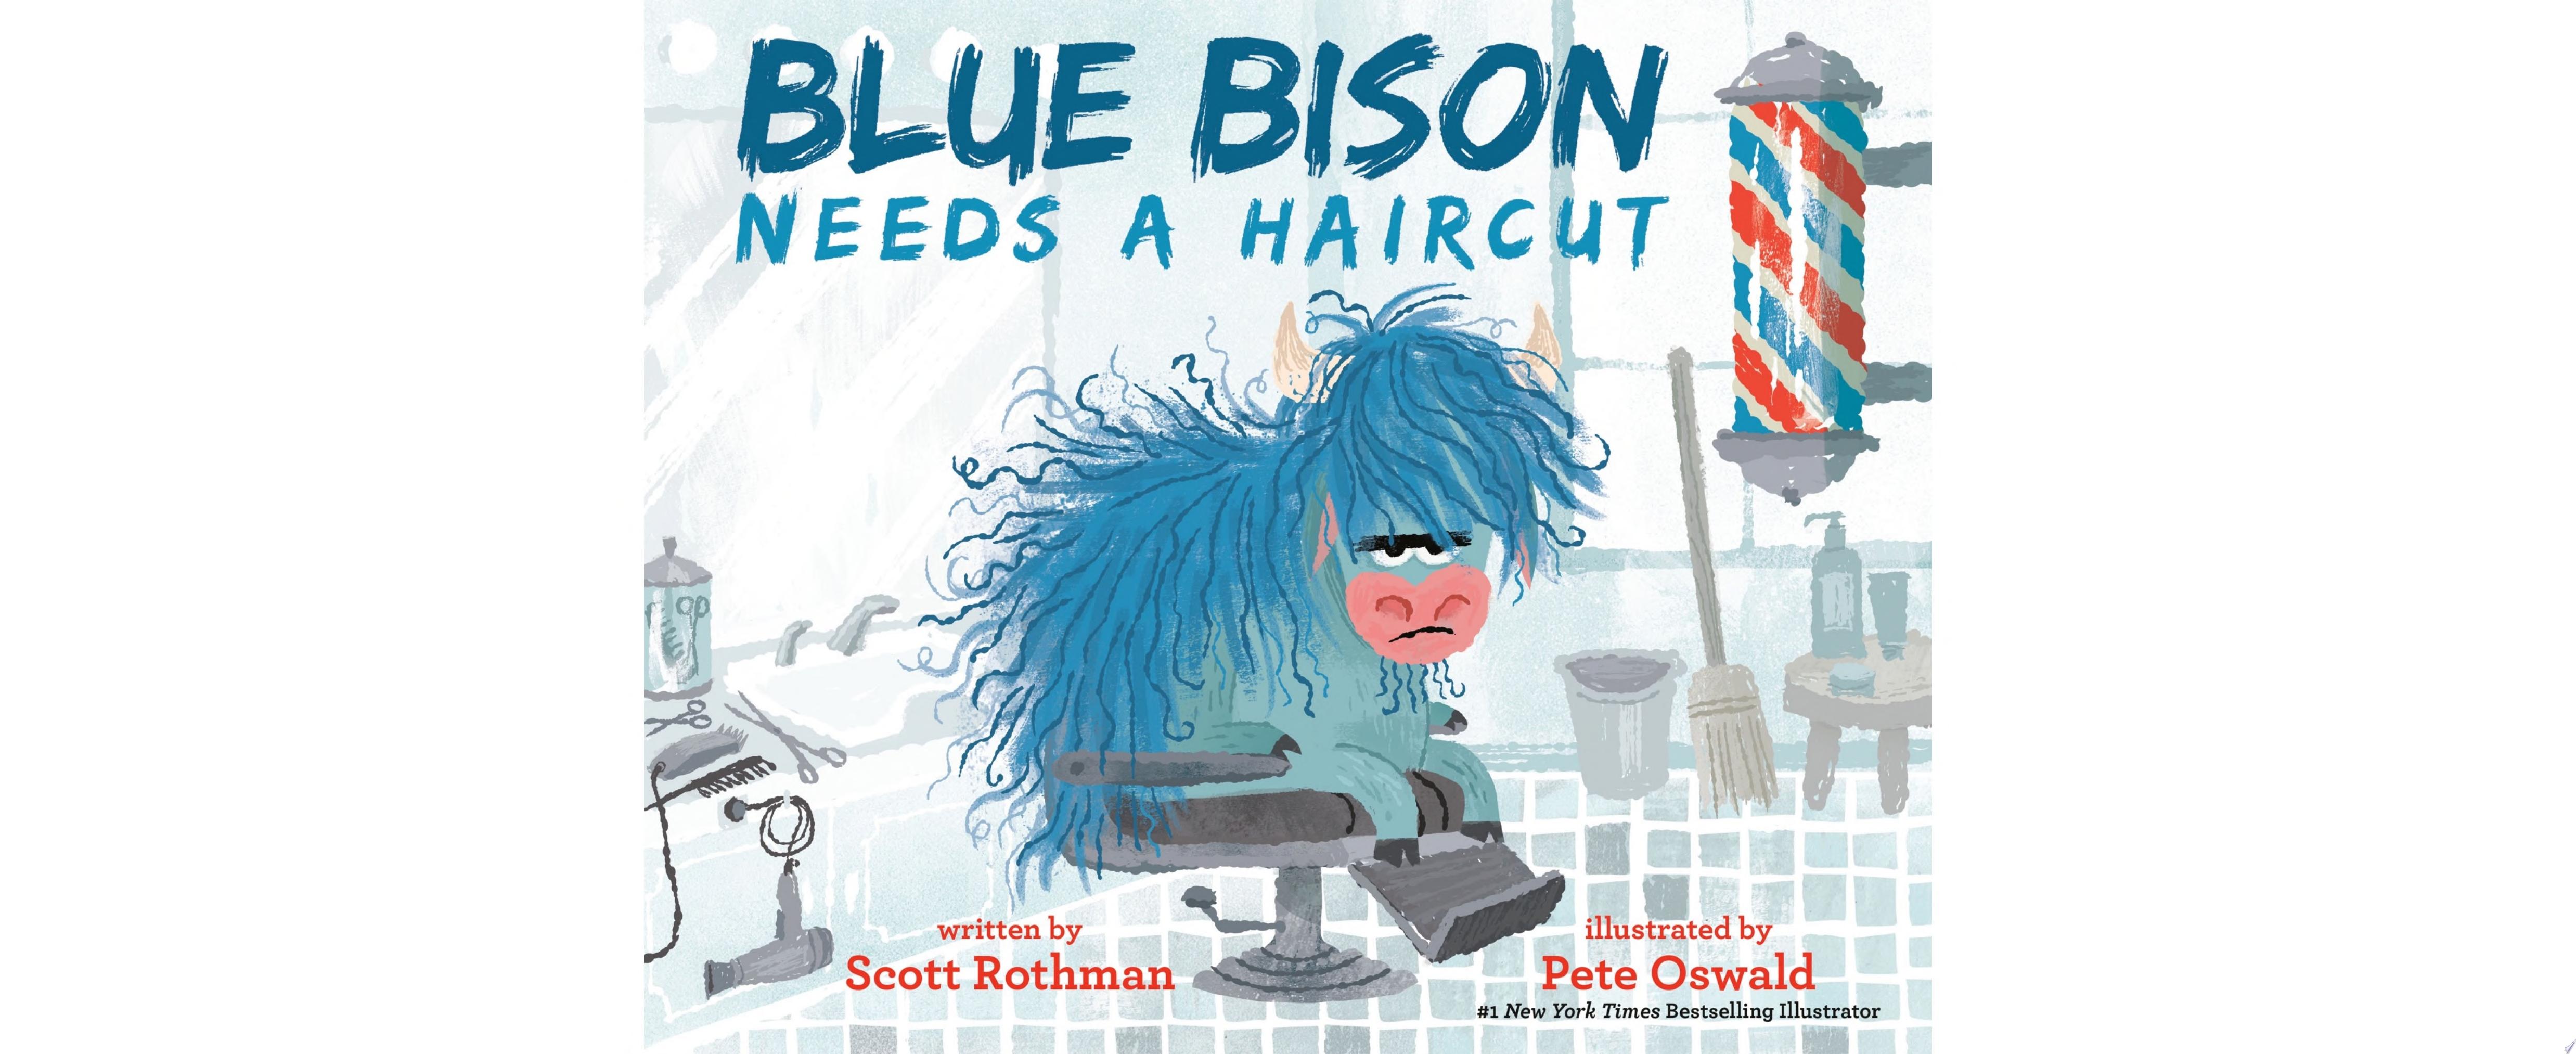 Image for "Blue Bison Needs a Haircut"